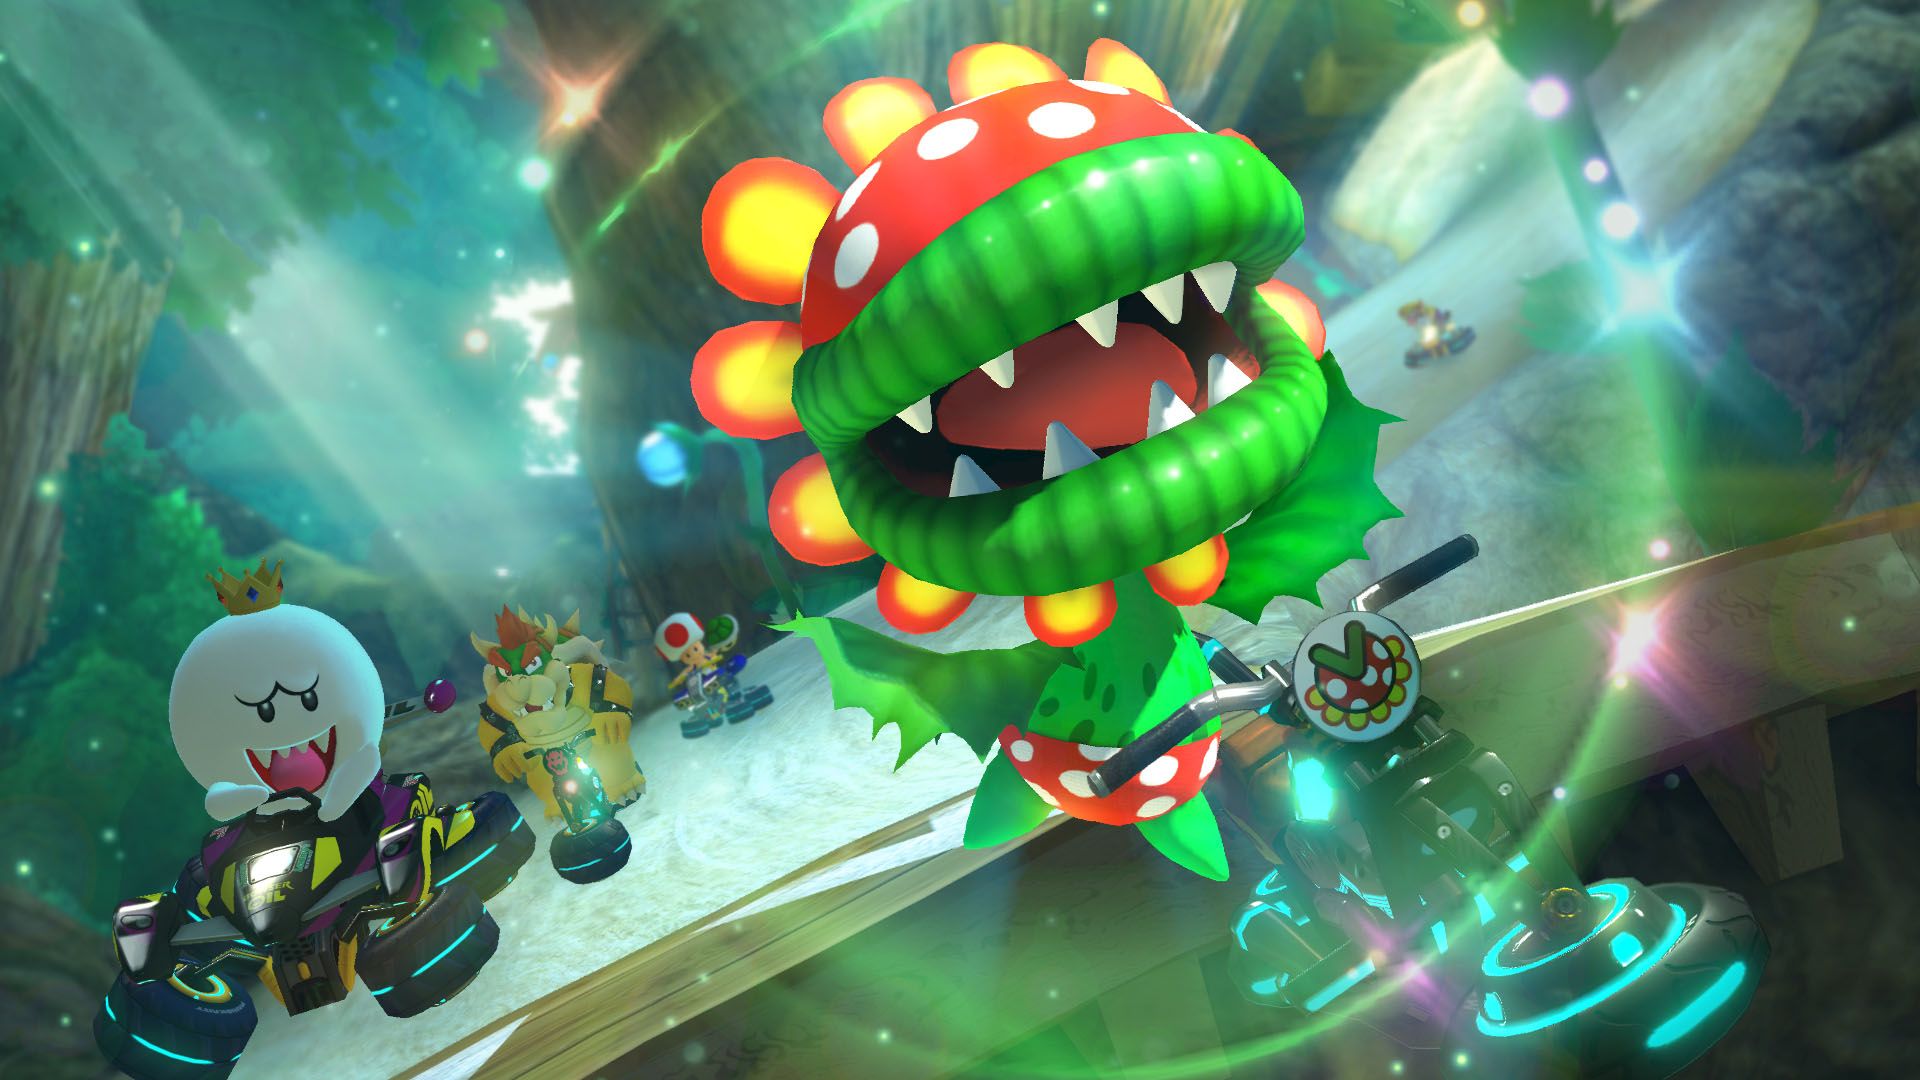 images/products/sw_switch_mario_kart_8_deluxe/_dlc/booster_course_pass/wave5/booster_chars_peteypiranha_scr1.jpg